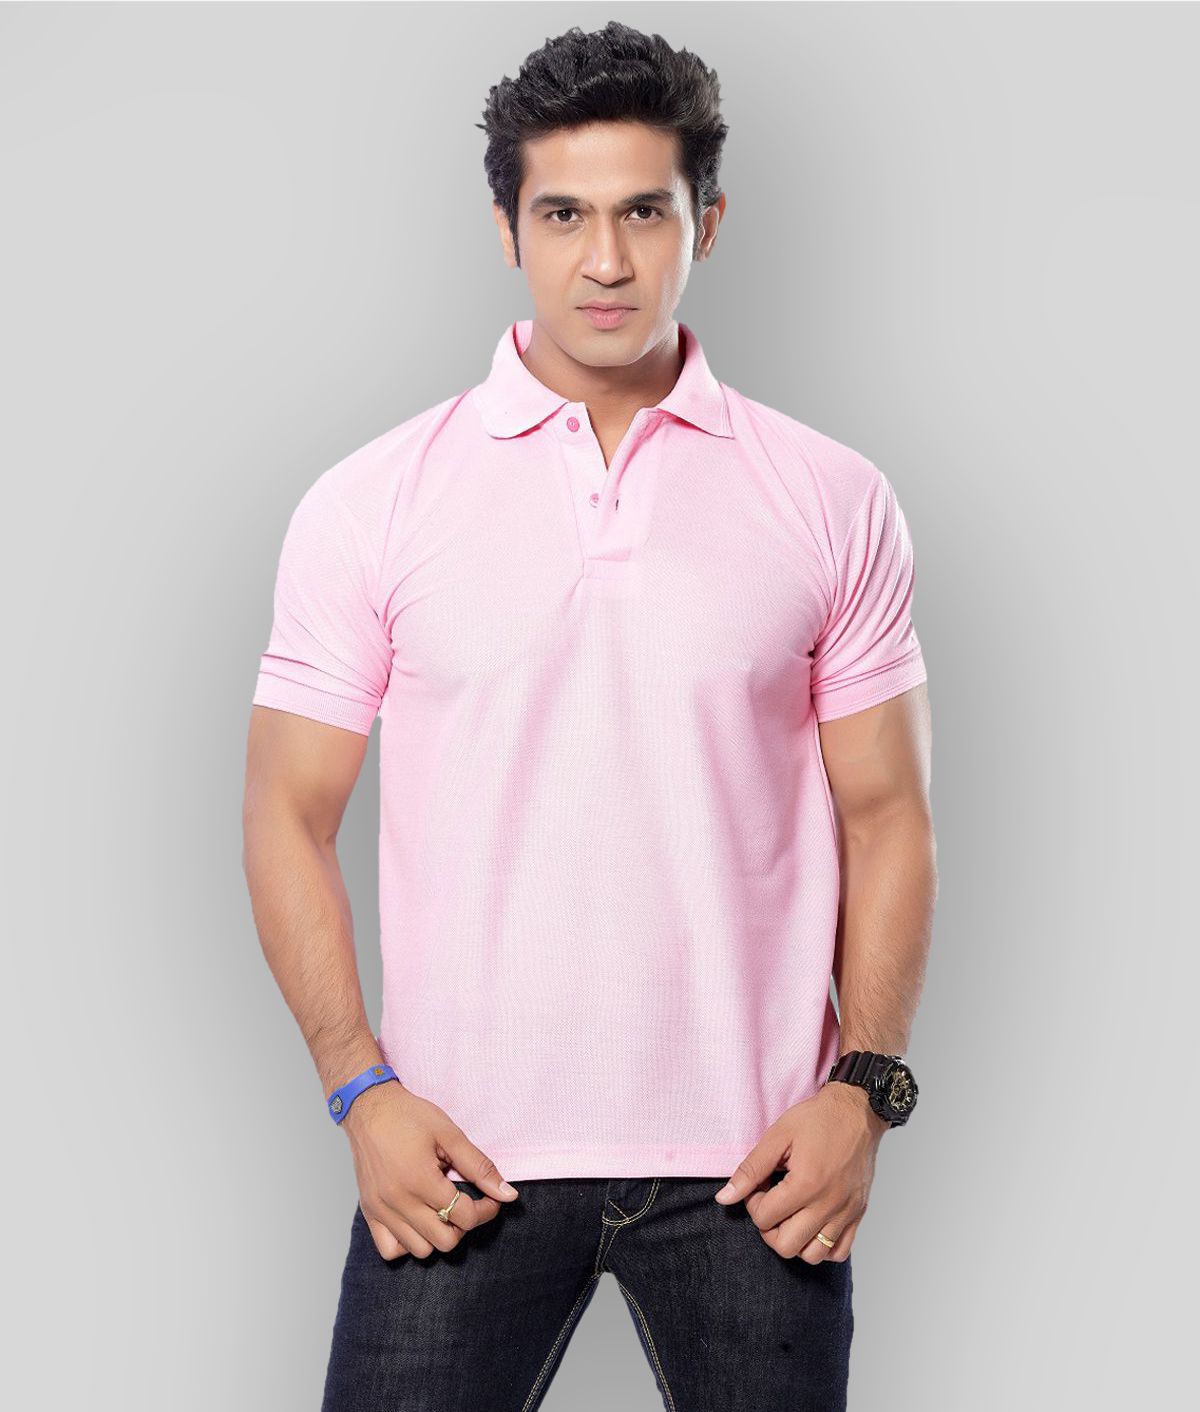     			in365 - Pink Cotton Blend Regular Fit Men's Polo T Shirt ( Pack of 1 )